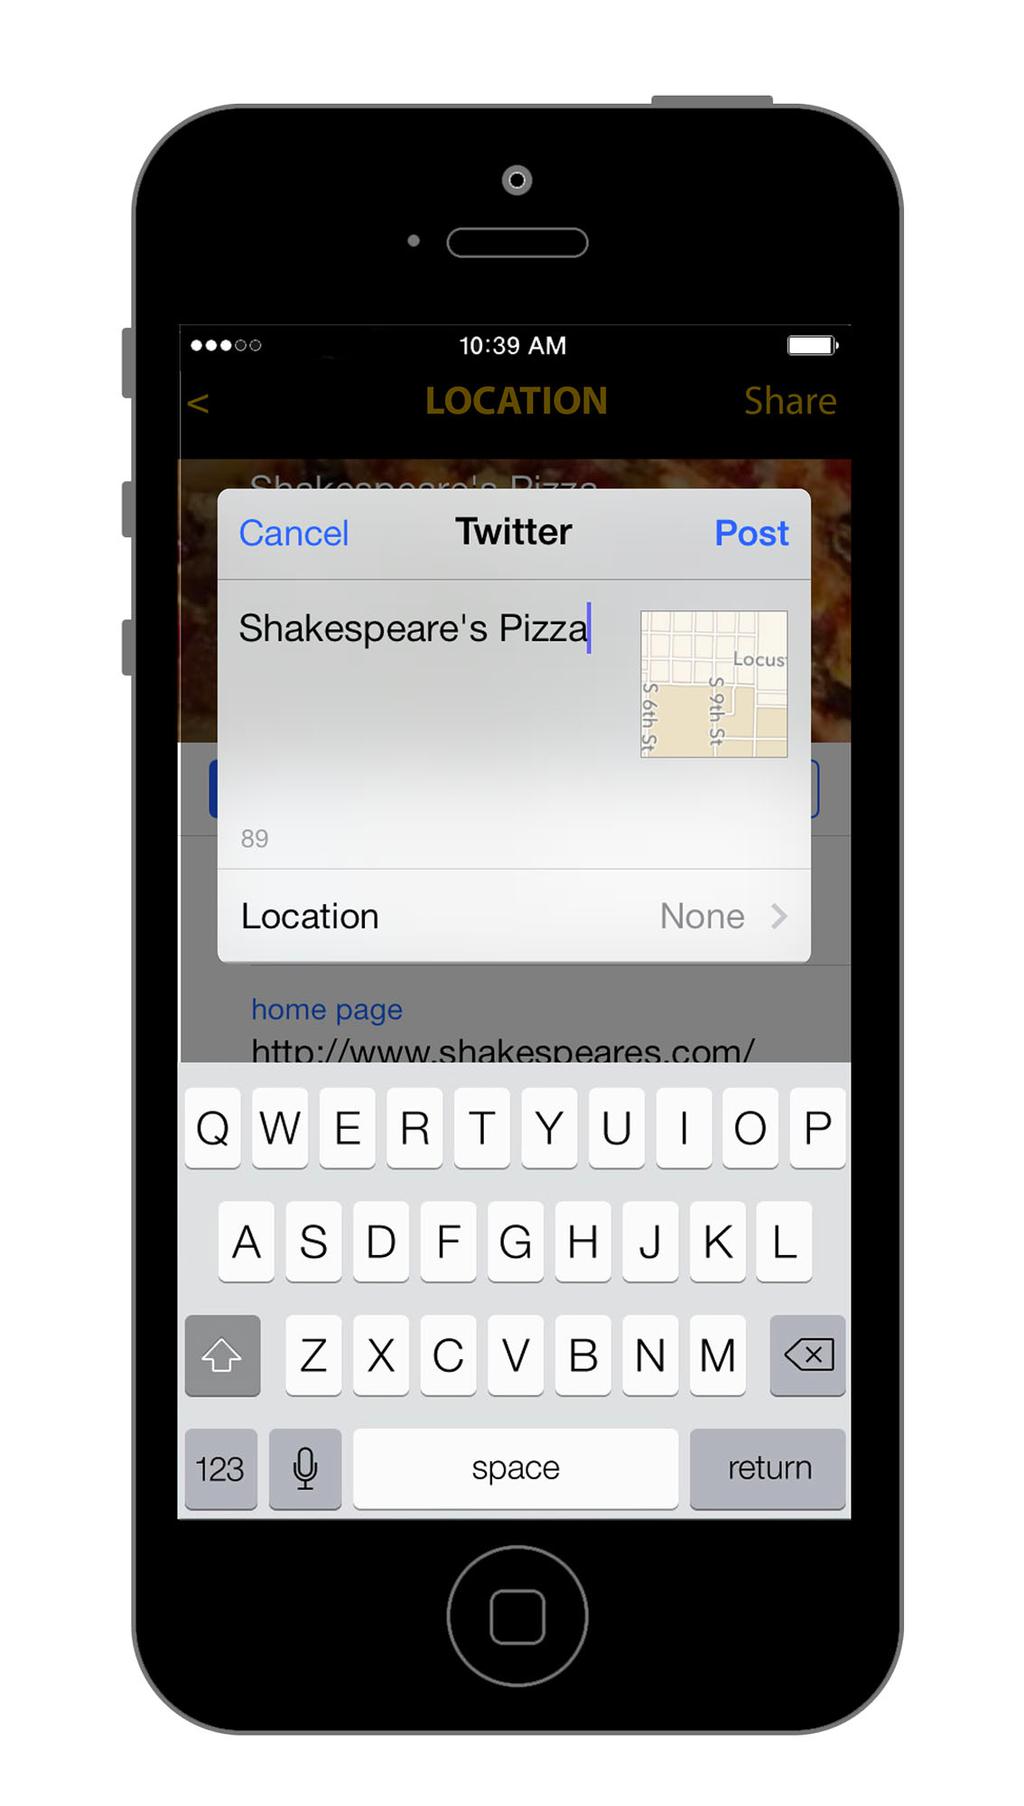 options. After you choose how to share your location, the screen on the left or a similar screen will pop up.